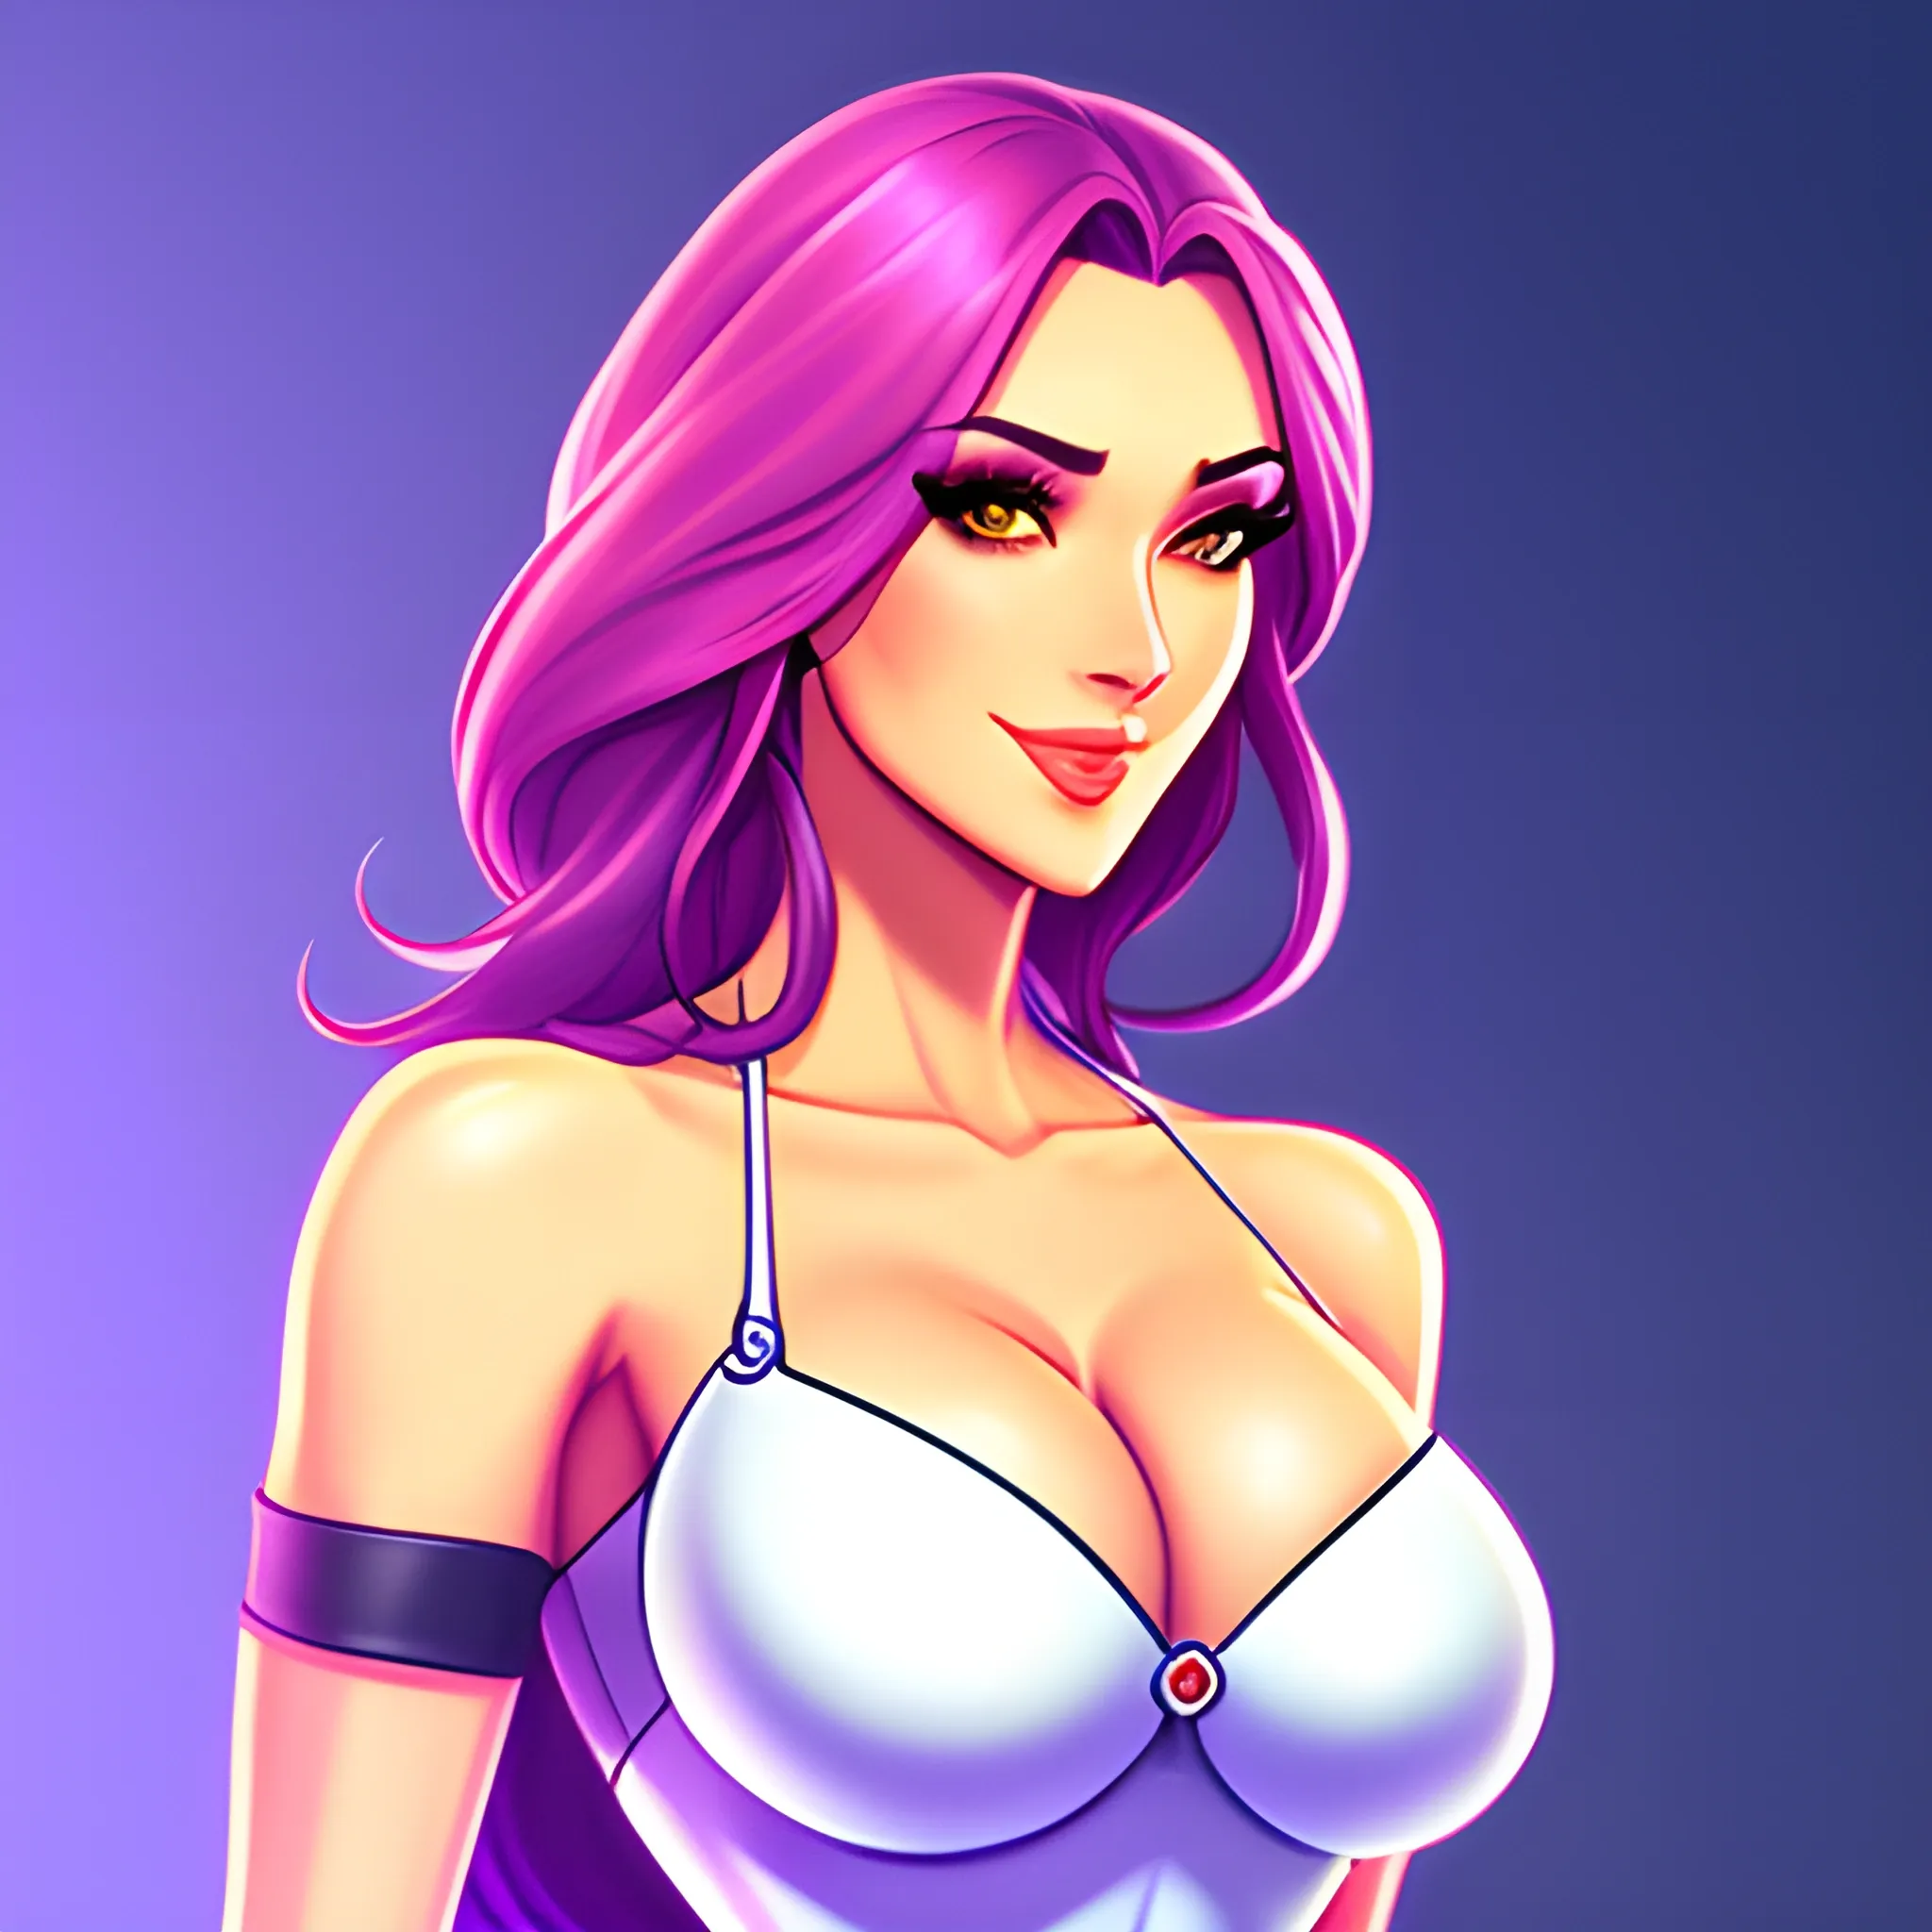 A beautiful girl while streaming, attractive gaming background, 2d hd mascot, 1080x1920 pixels